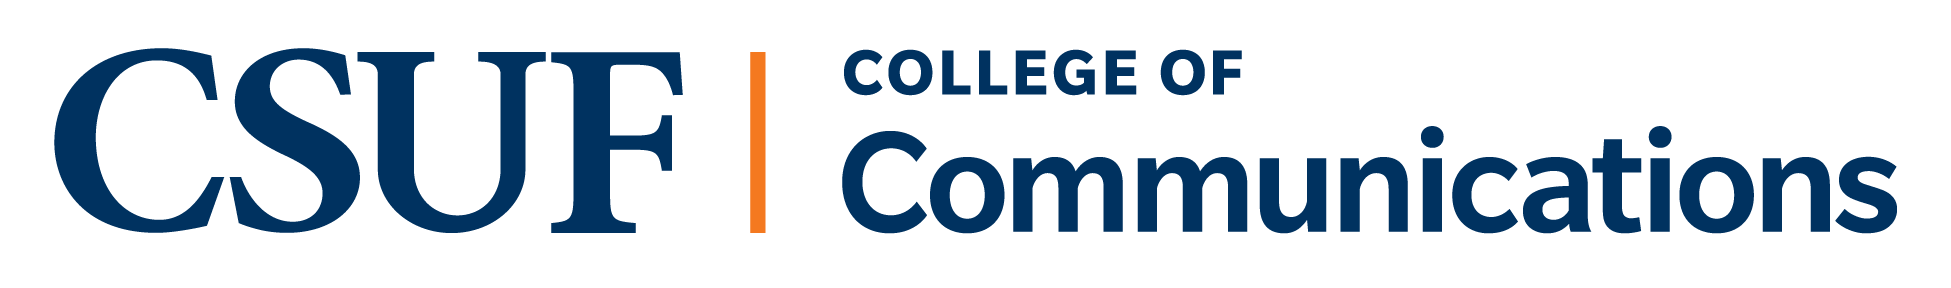 College of Communications logo